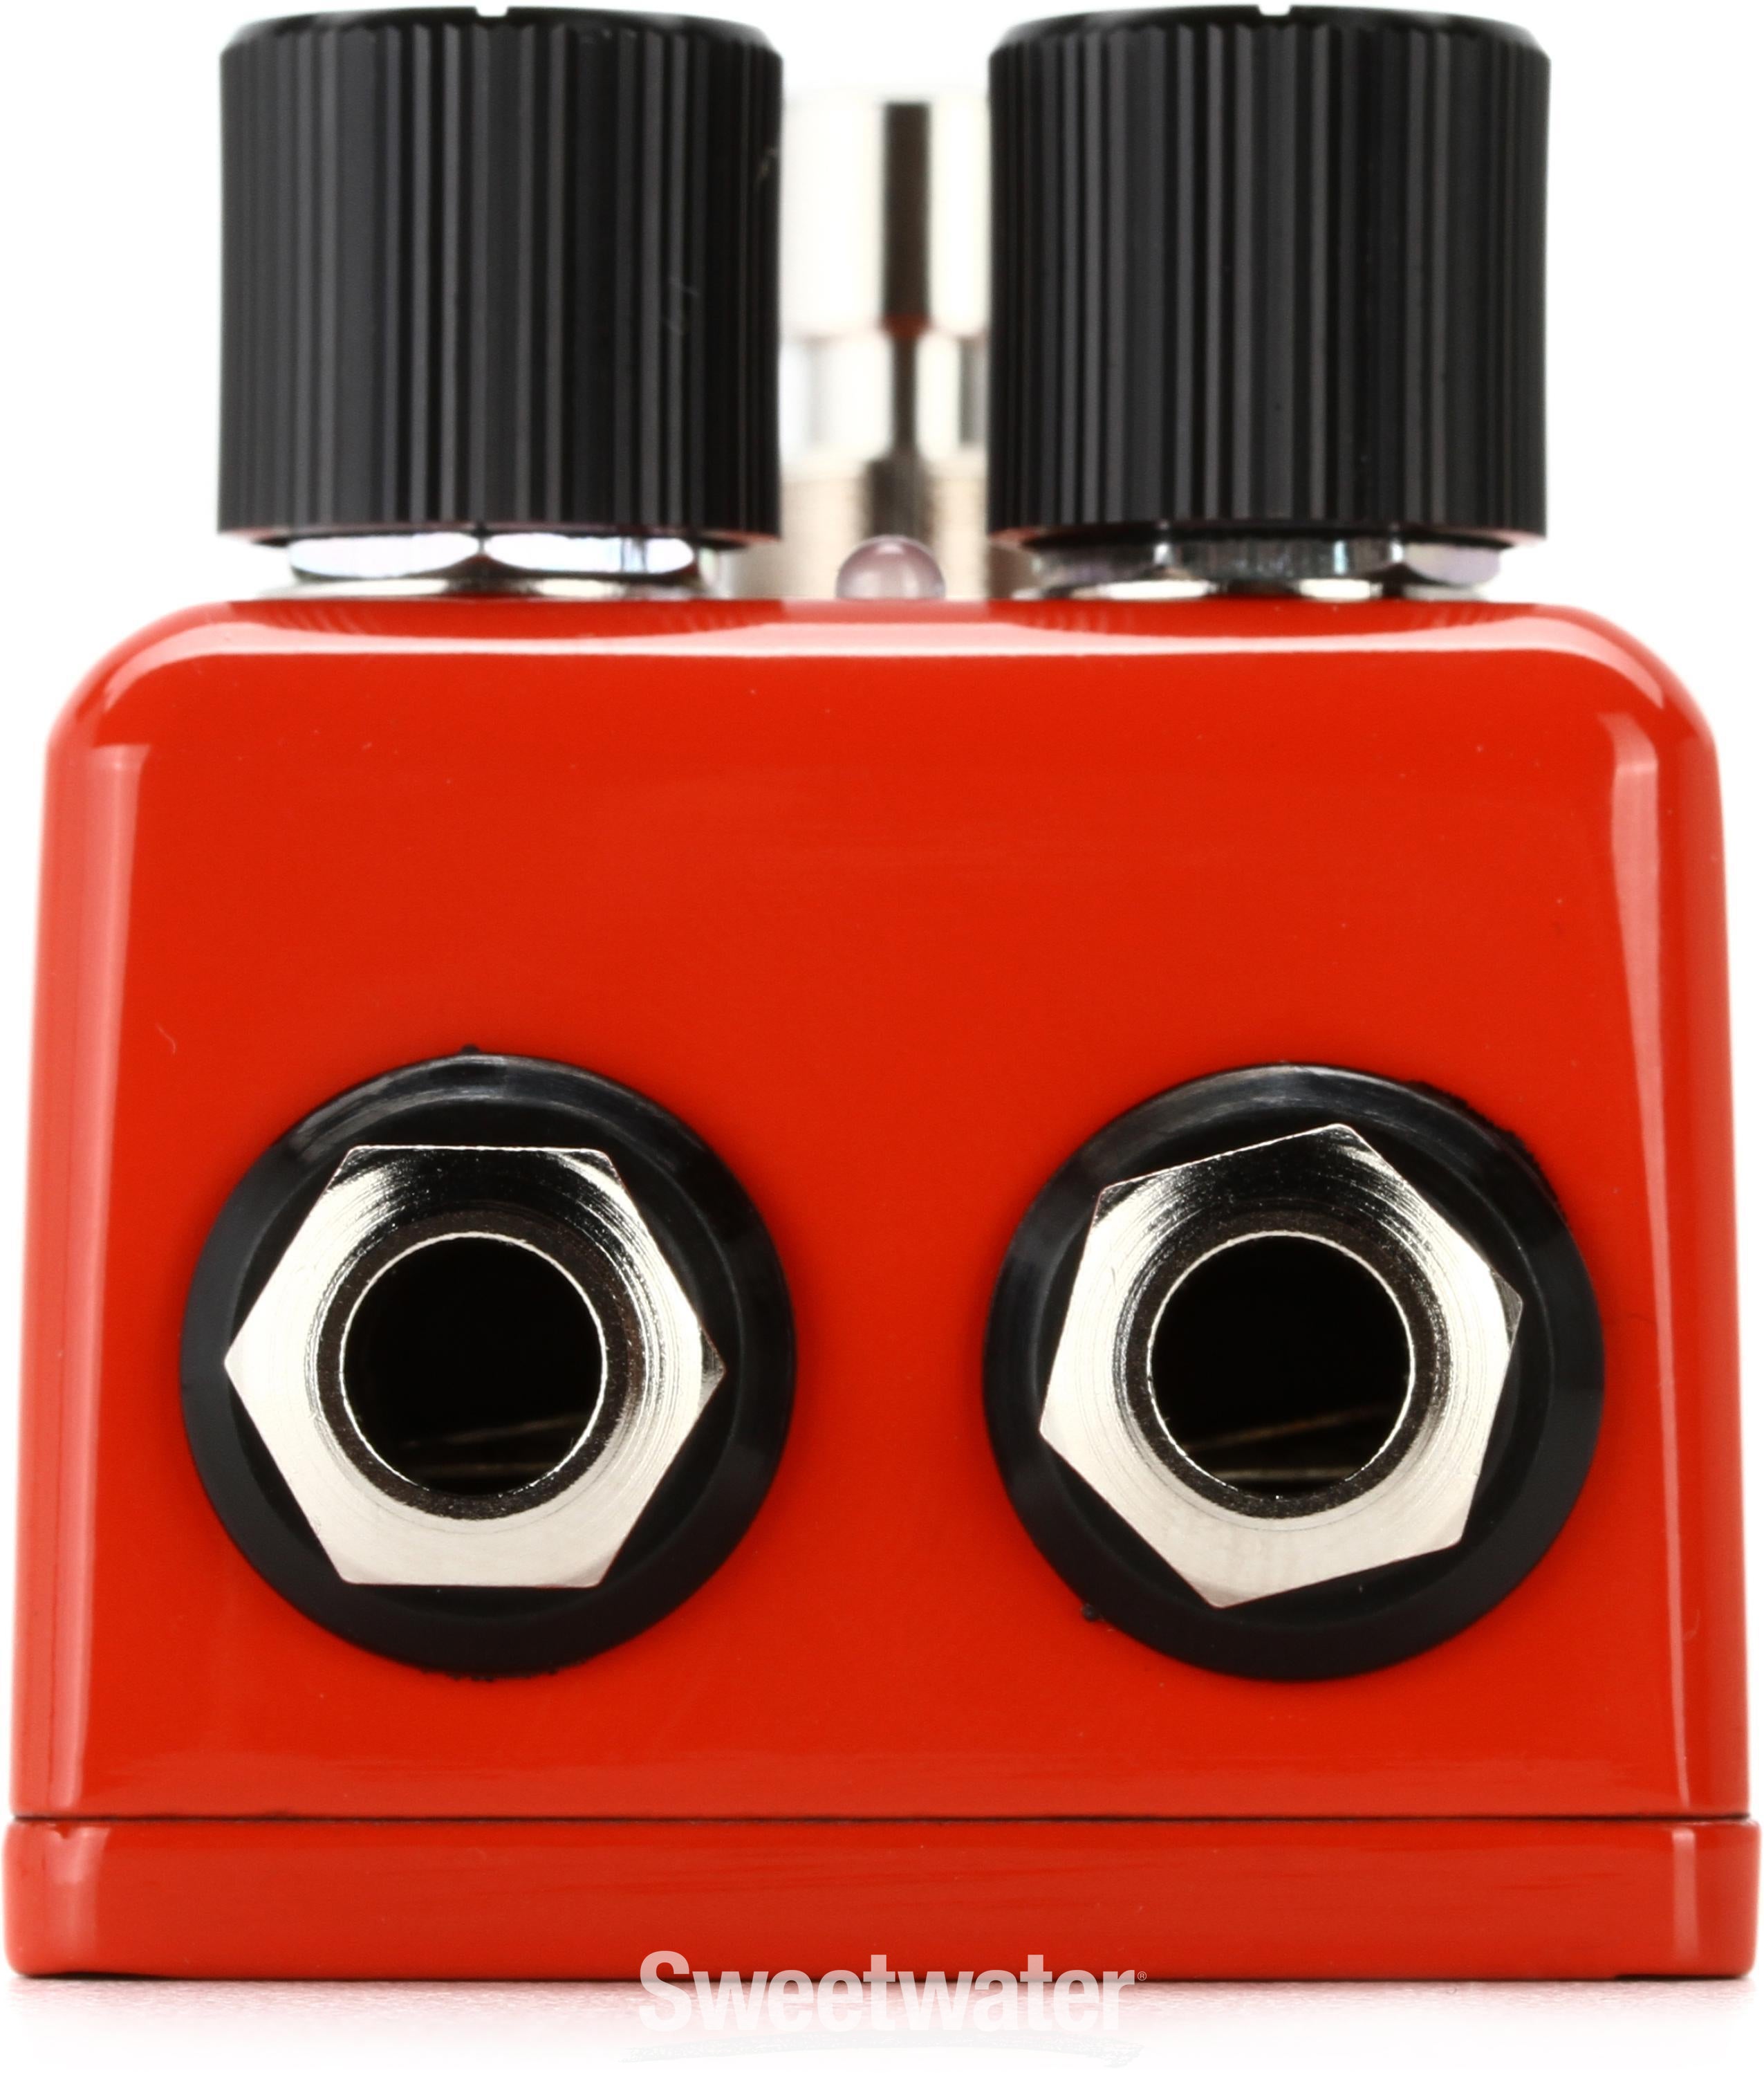 Red Witch Seven Sisters Scarlett Overdrive Pedal